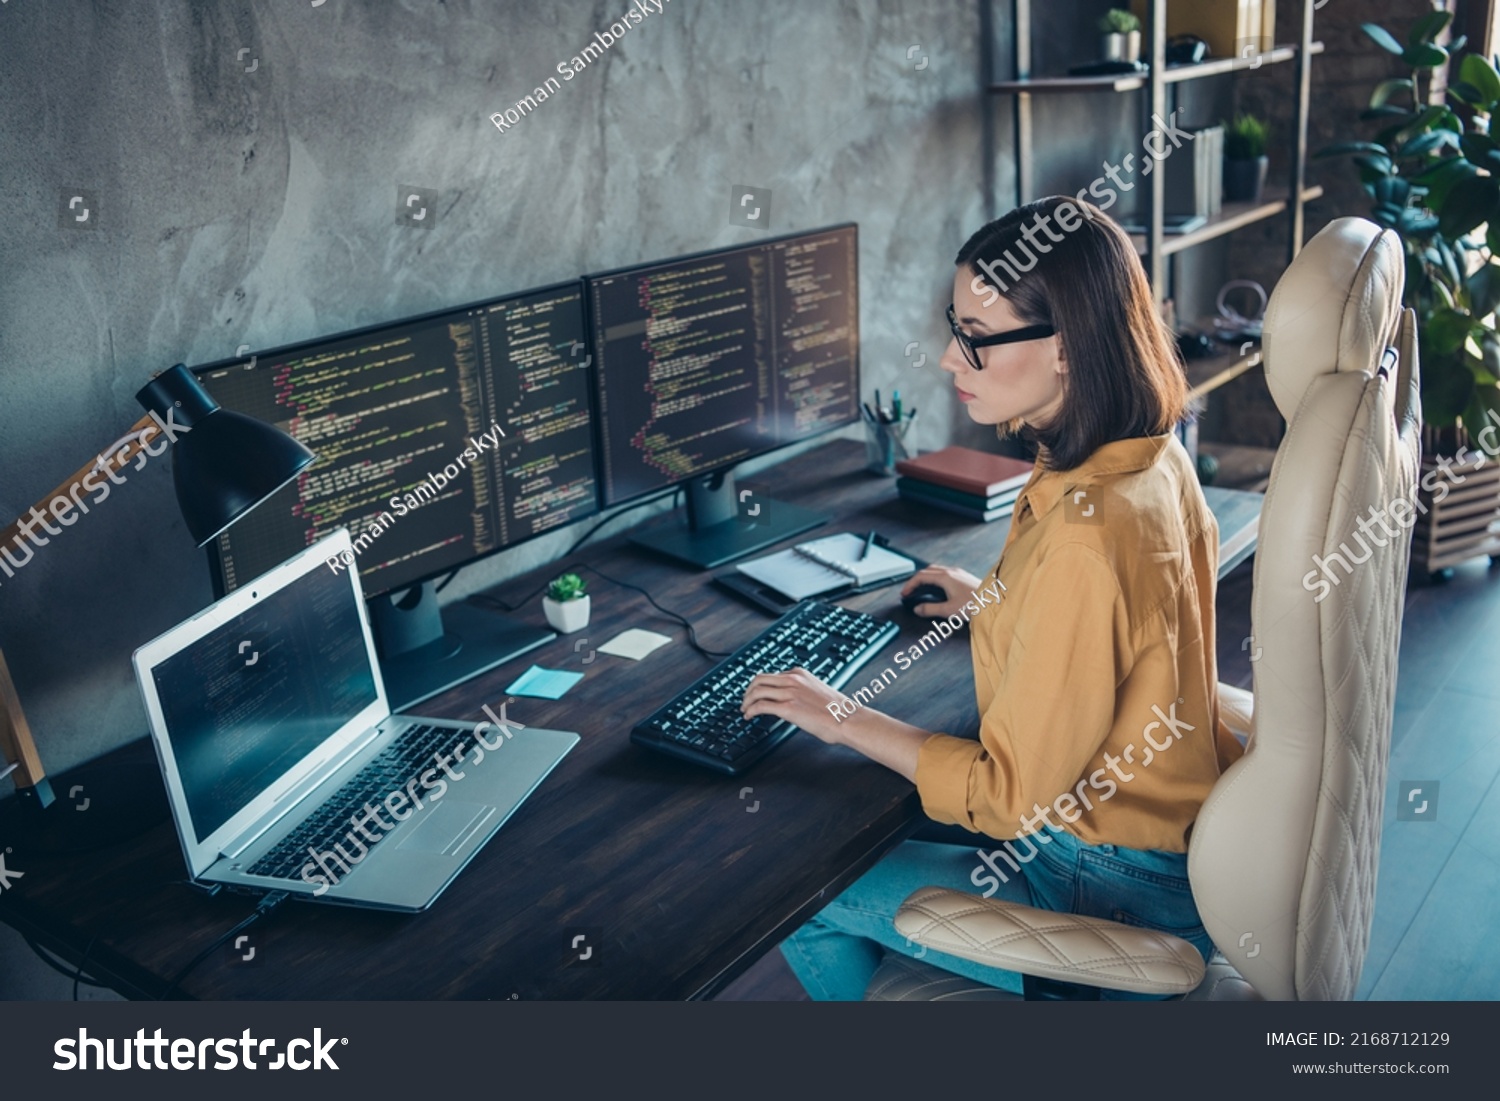 Profile side view portrait of attractive focused skilled girl web developer using laptop at workplace workstation indoors #2168712129